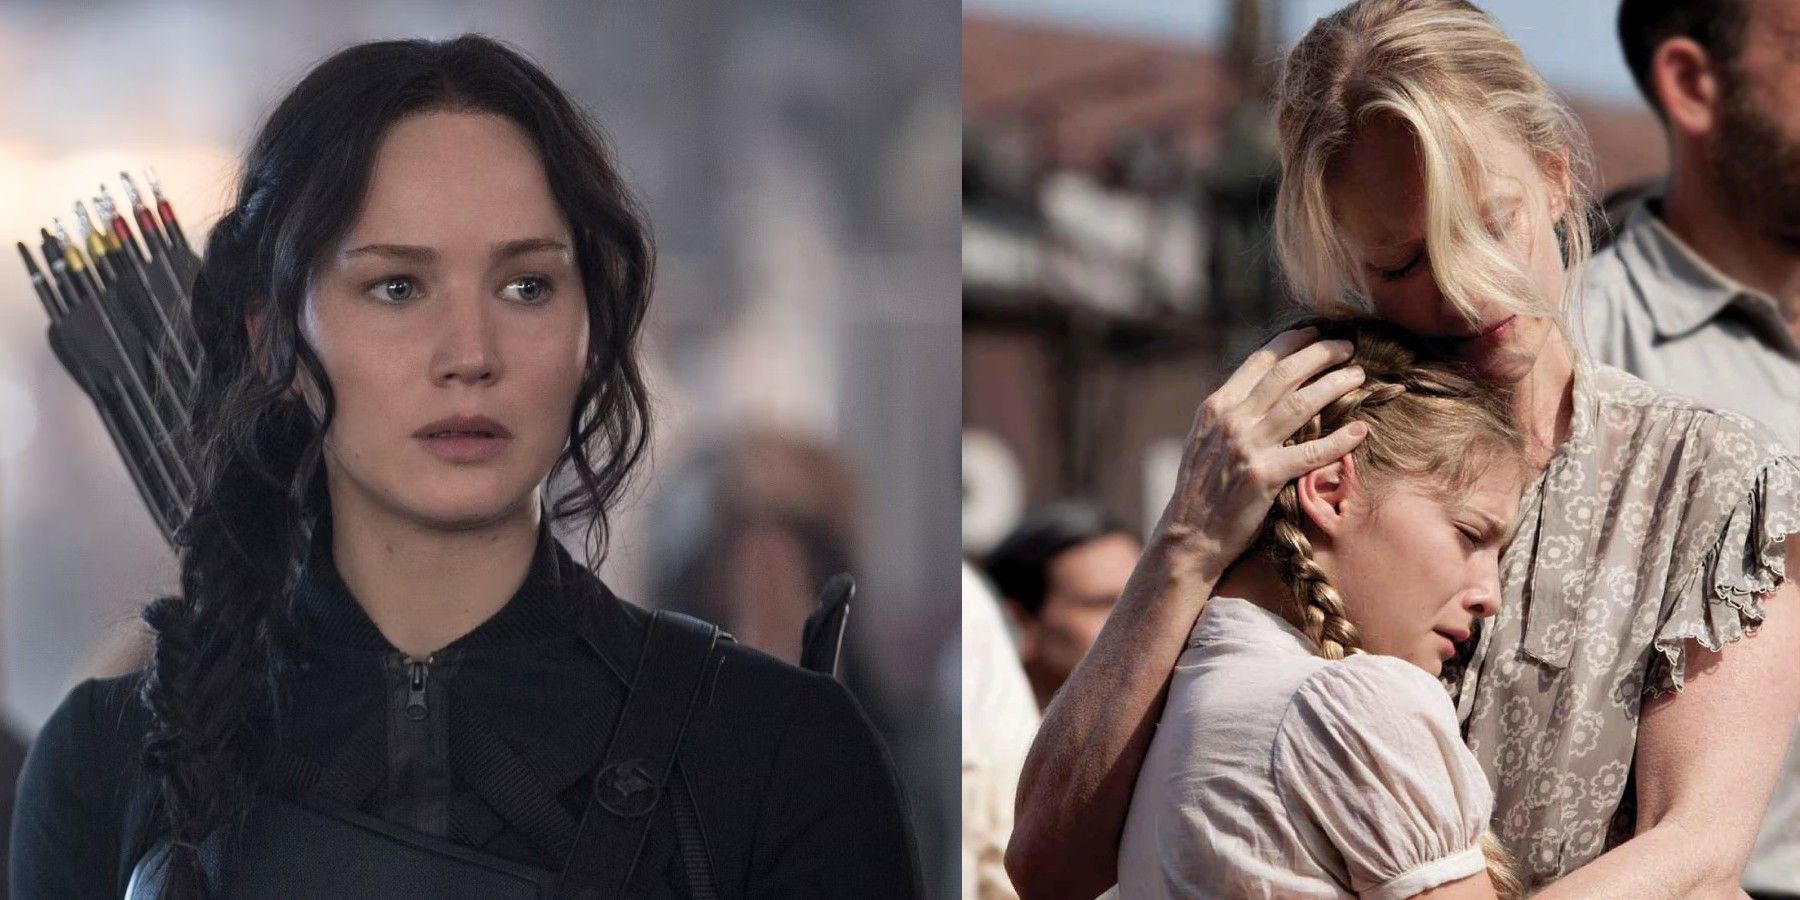 The Hunger Games: Katniss, Prim and her mother